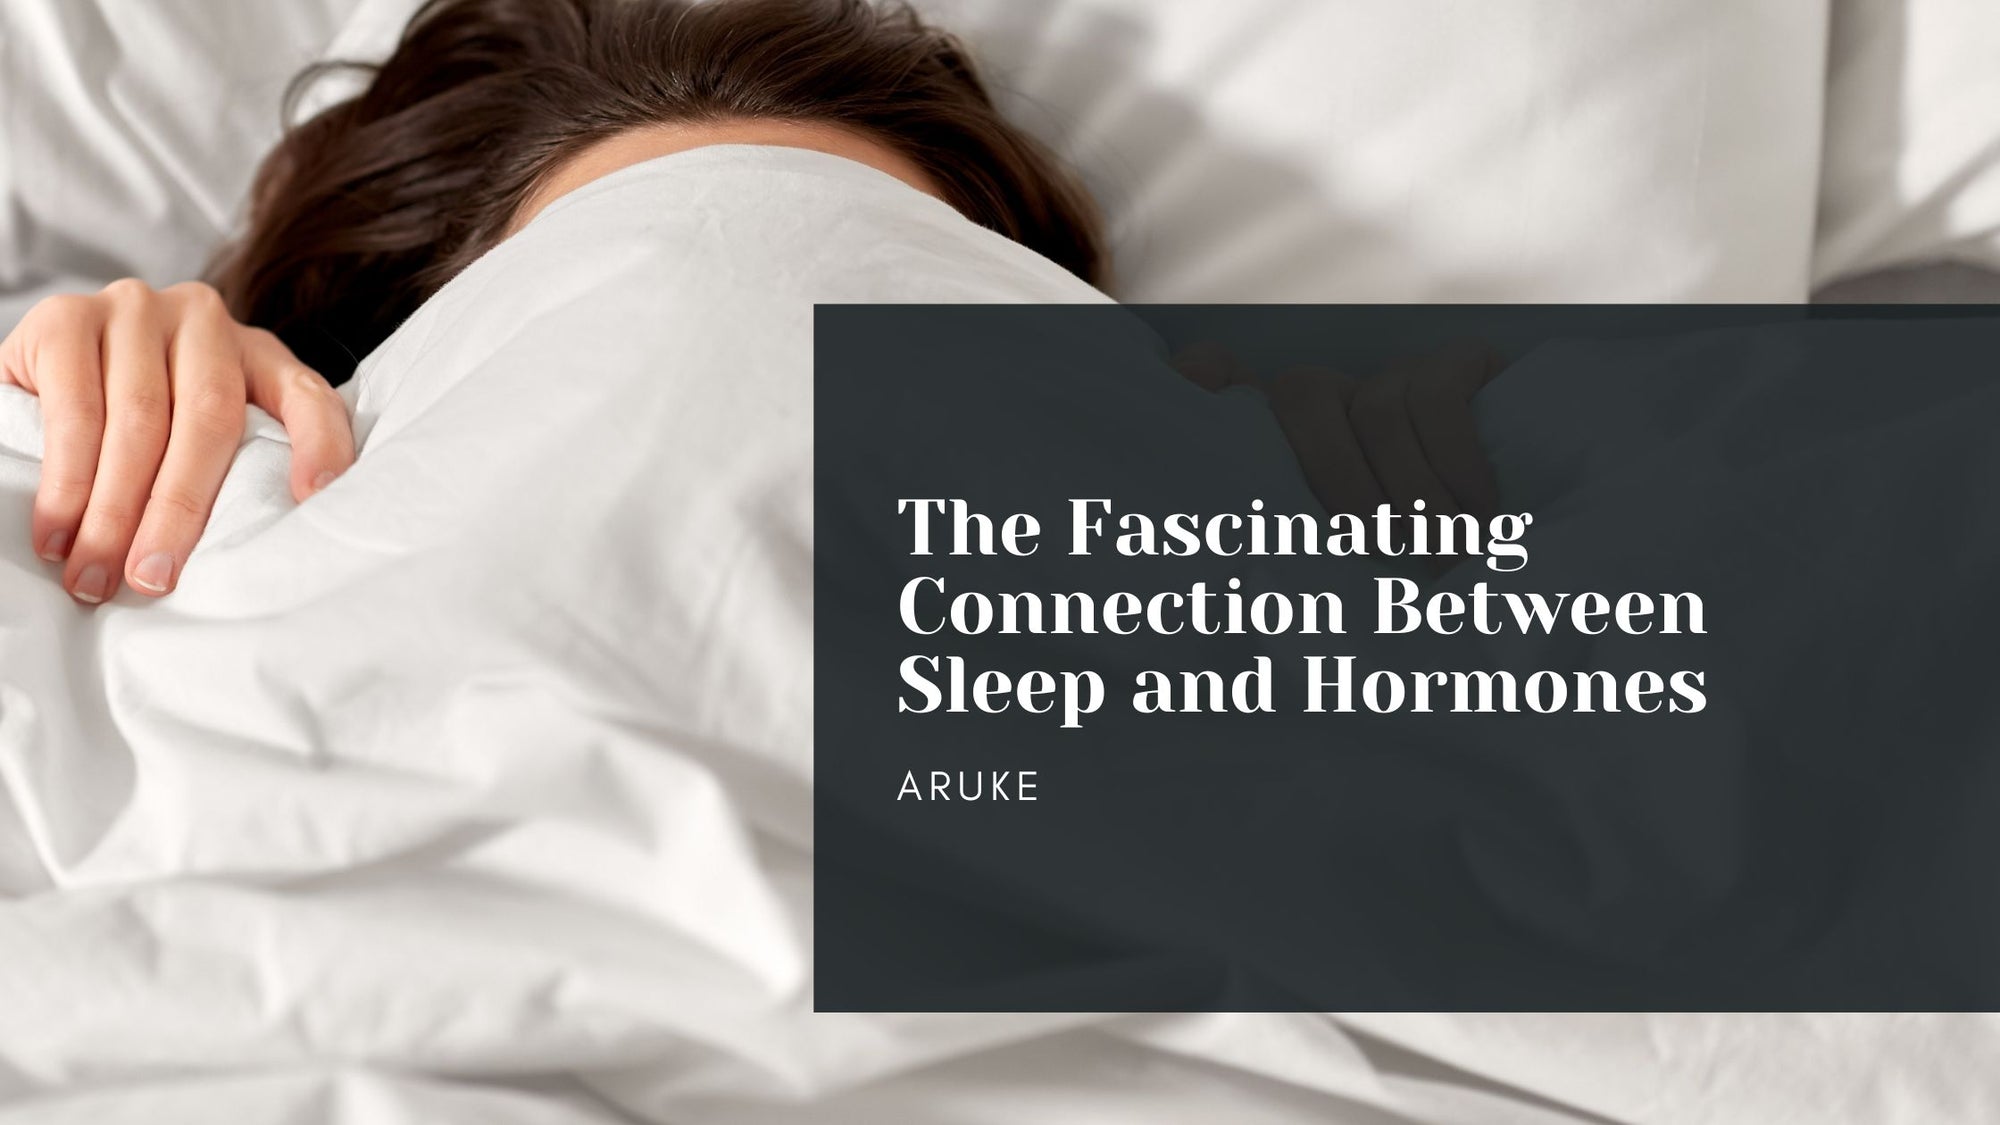 The Fascinating Connection Between Sleep and Hormones